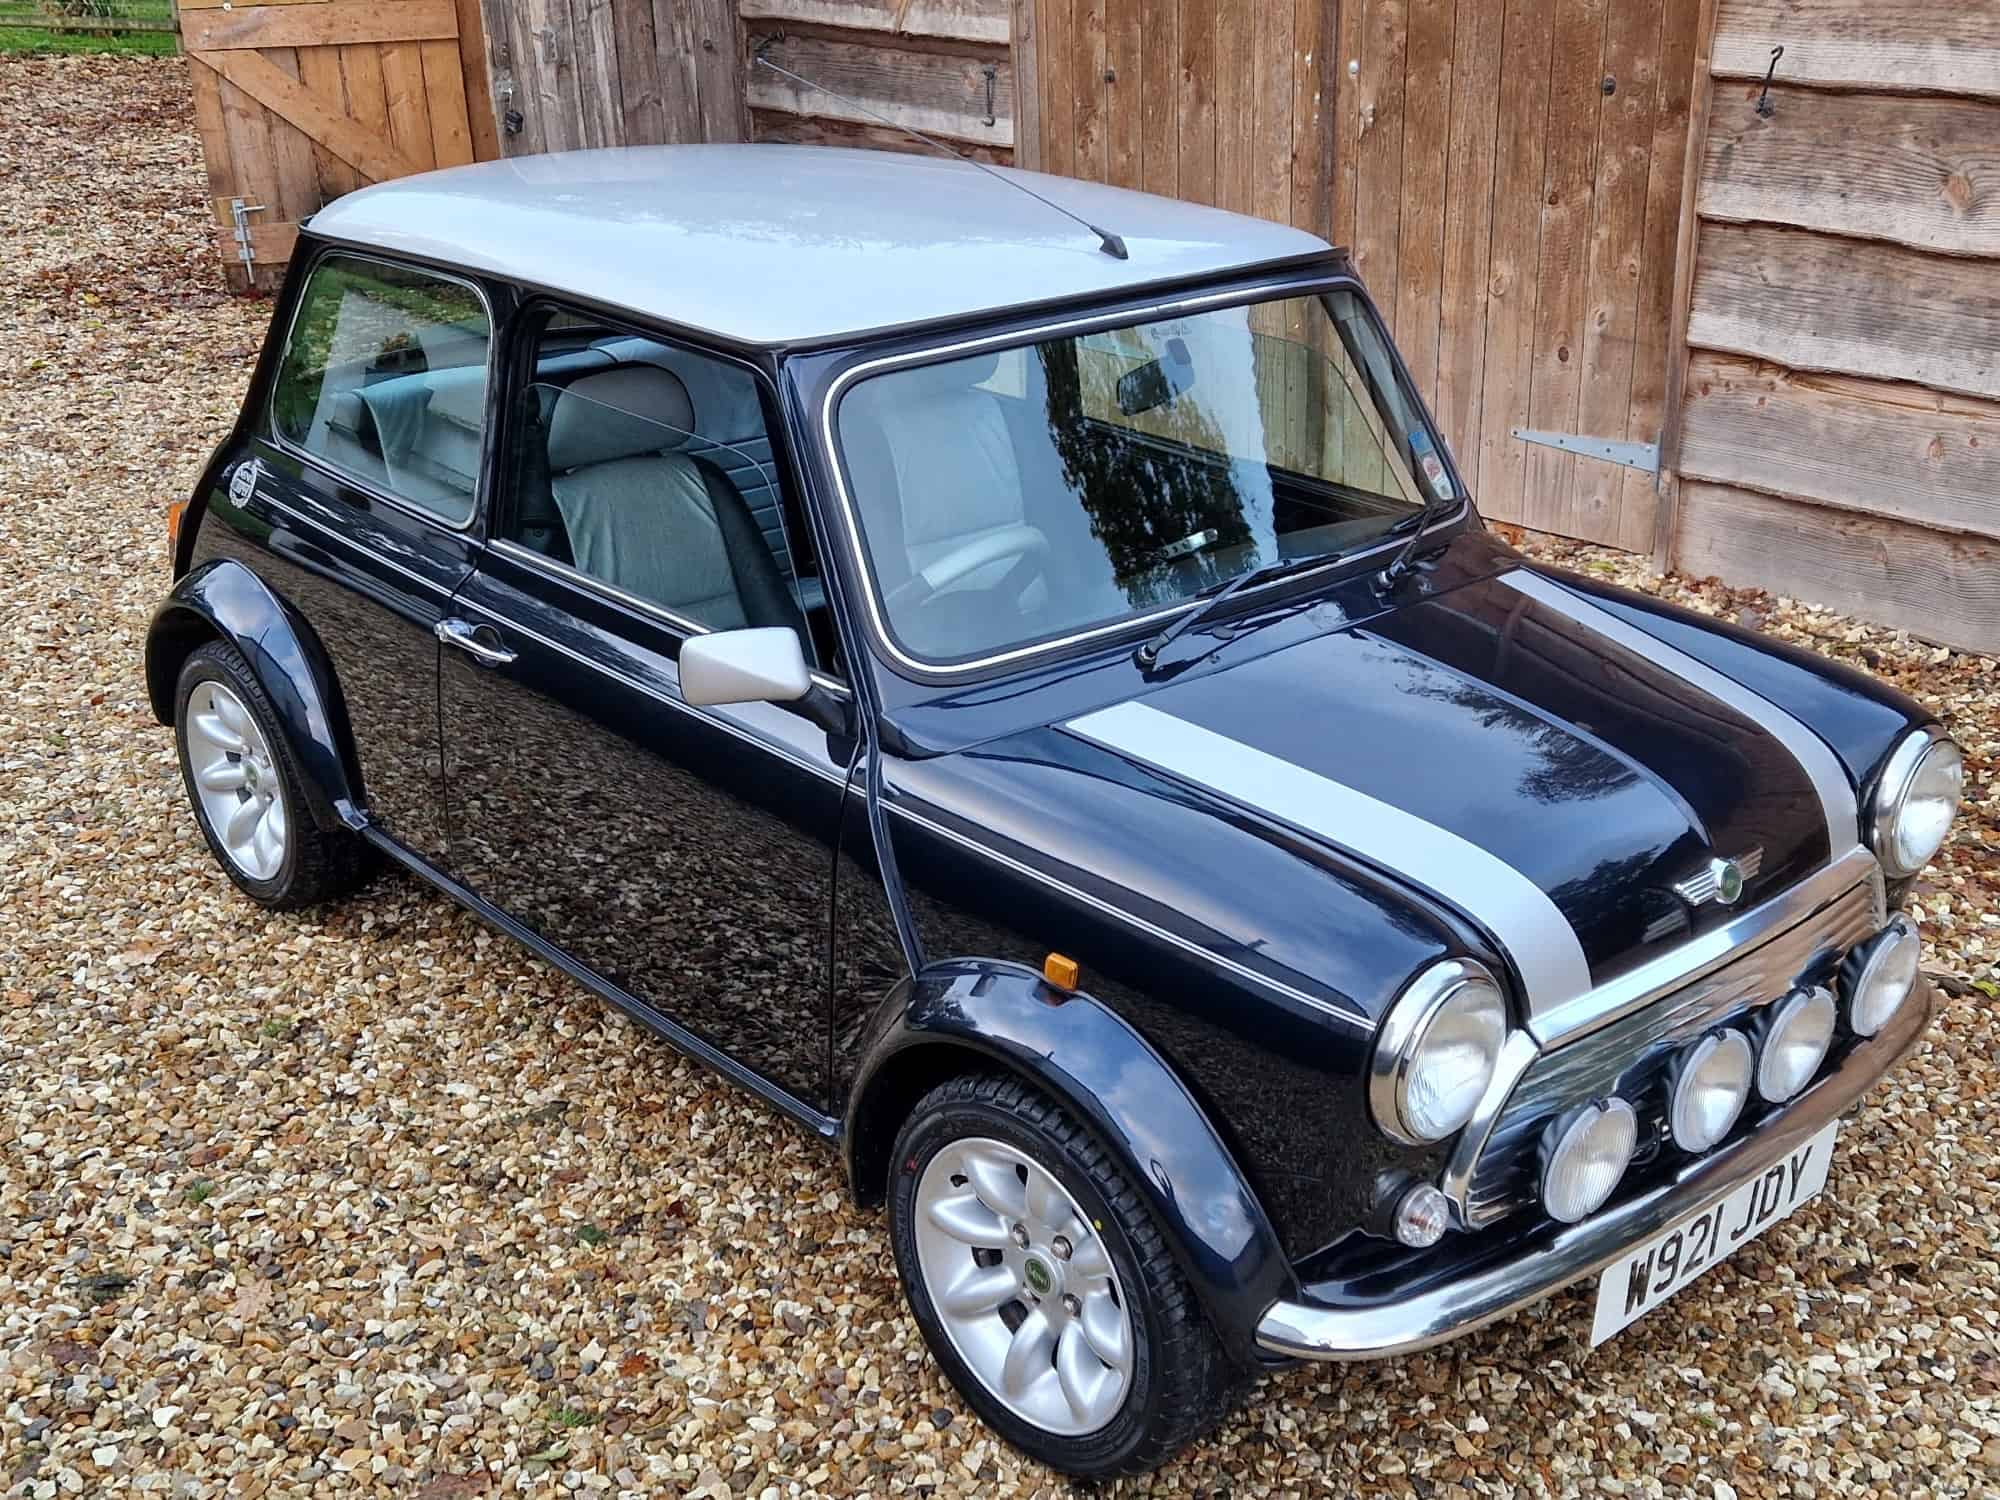 ** NOW SOLD ** Rover Mini Cooper Sport On Just 4030 Miles From New!